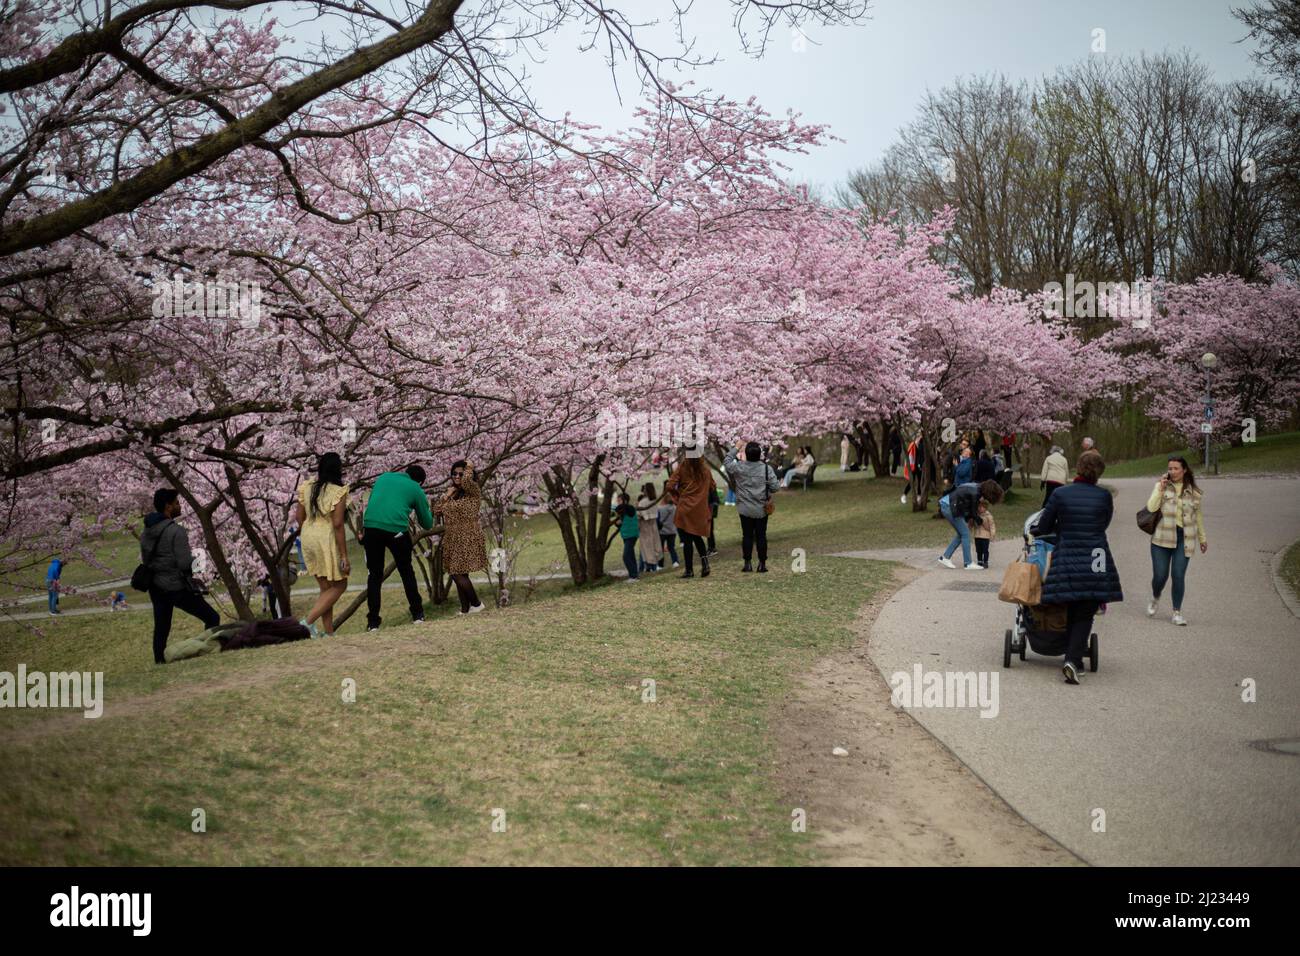 Munich, Germany. 29th Mar, 2022. Many people gather in the Olympic park in Munich, Germany on March 29, 2022 at the cherry blossoms. In the japanese culture the time of the cherry blossom is a highlight of the calendar and the beginning of the spring. (Photo by Alexander Pohl/Sipa USA) Credit: Sipa USA/Alamy Live News Stock Photo